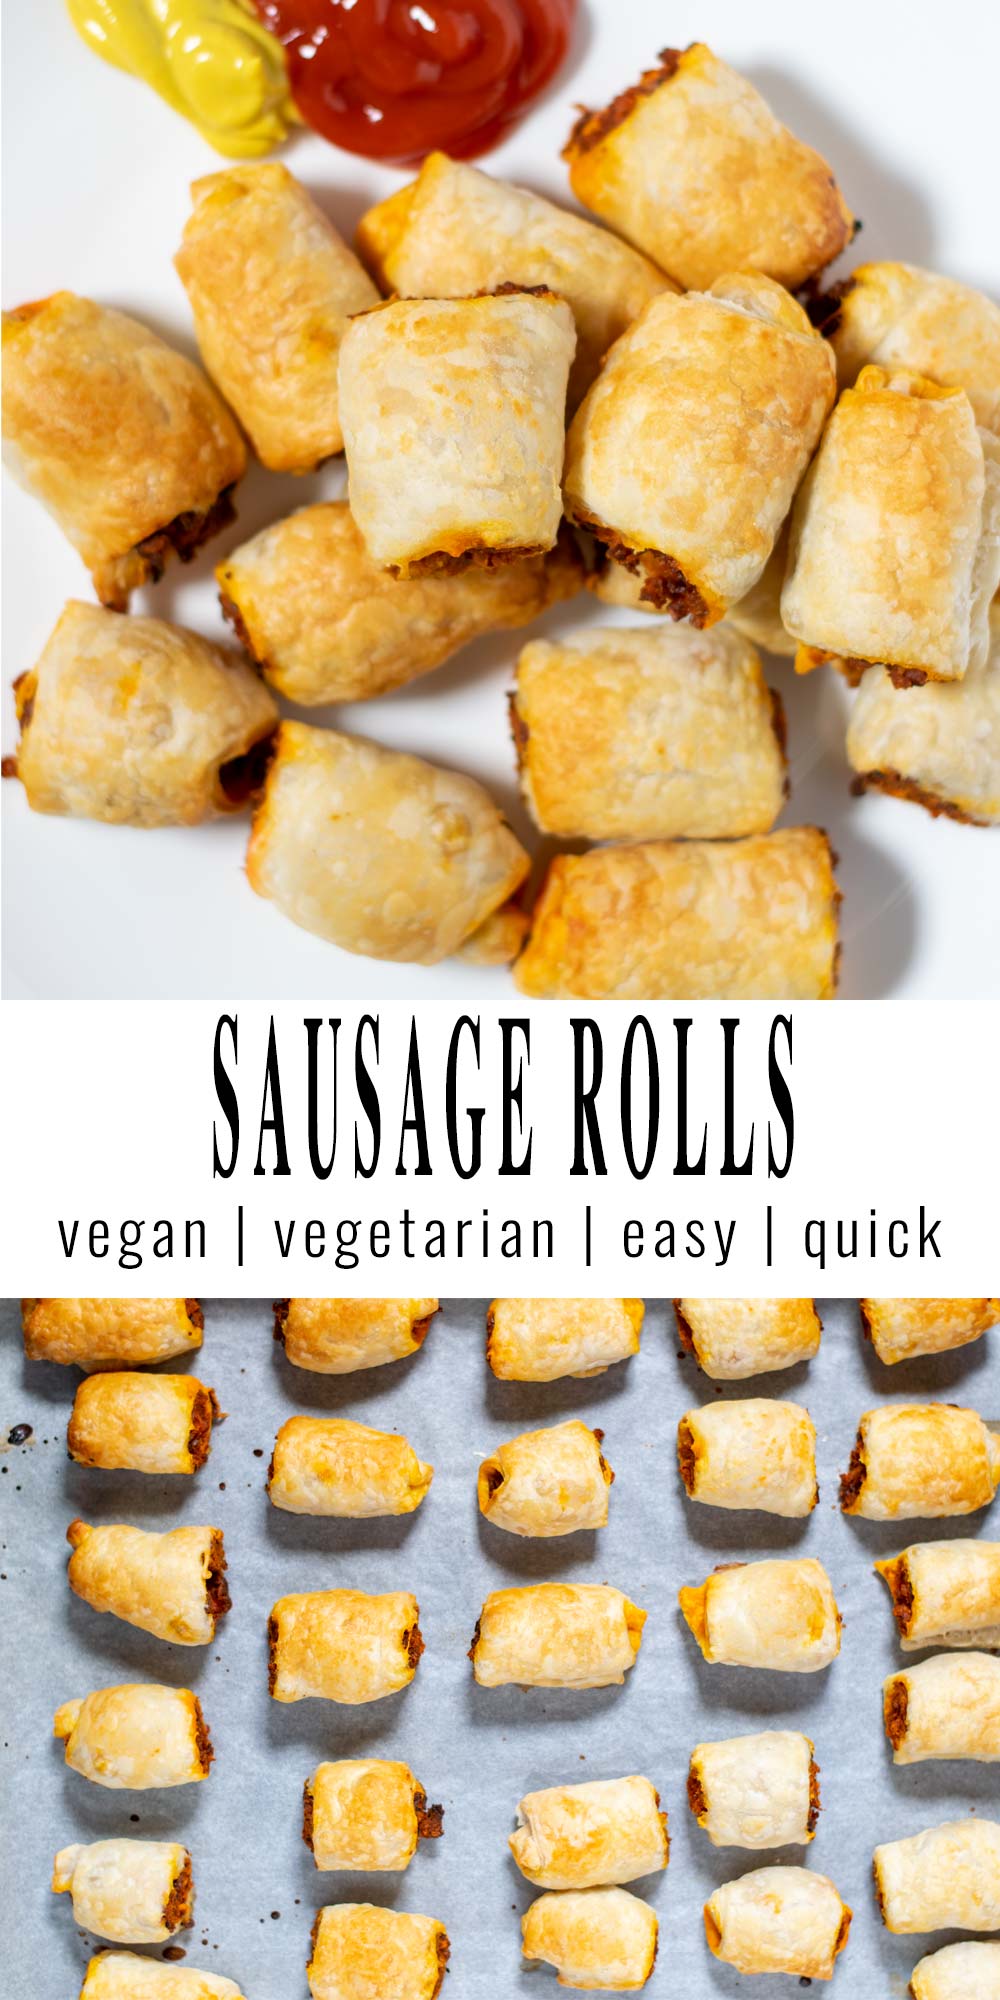 Collage of two pictures of Sausage Rolls with recipe title text.